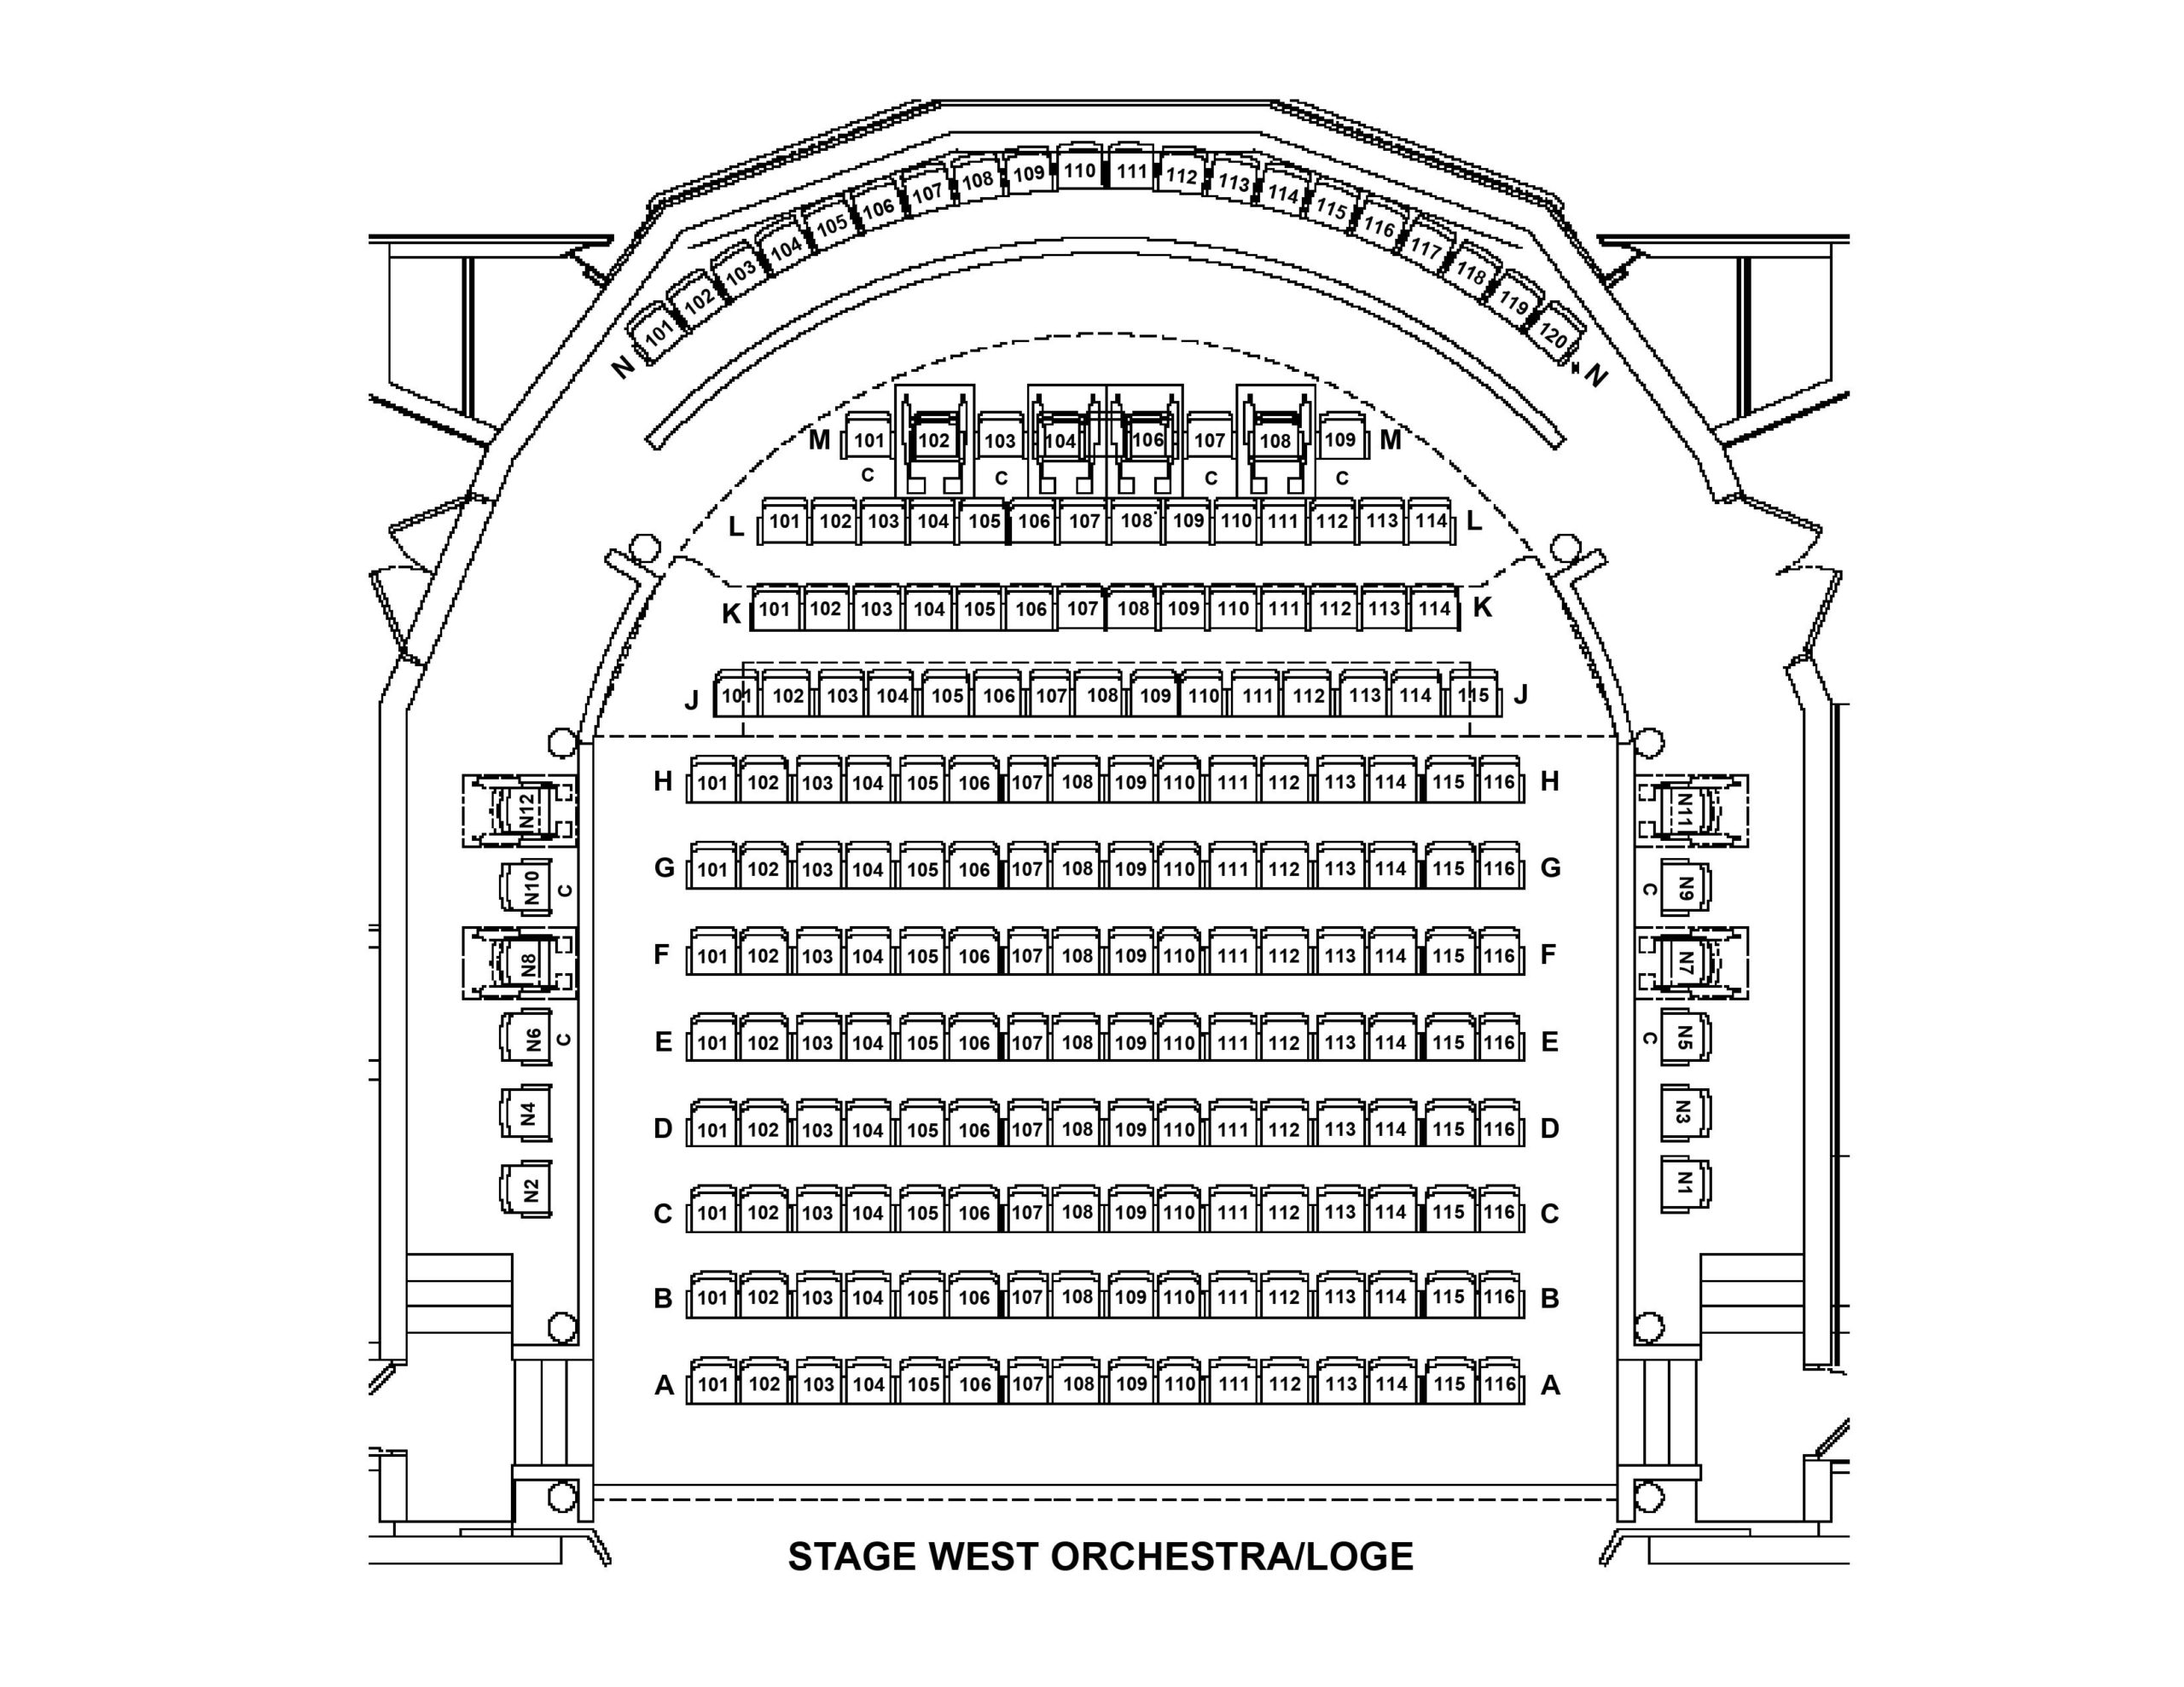 Seating Charts - Herberger Theater Center